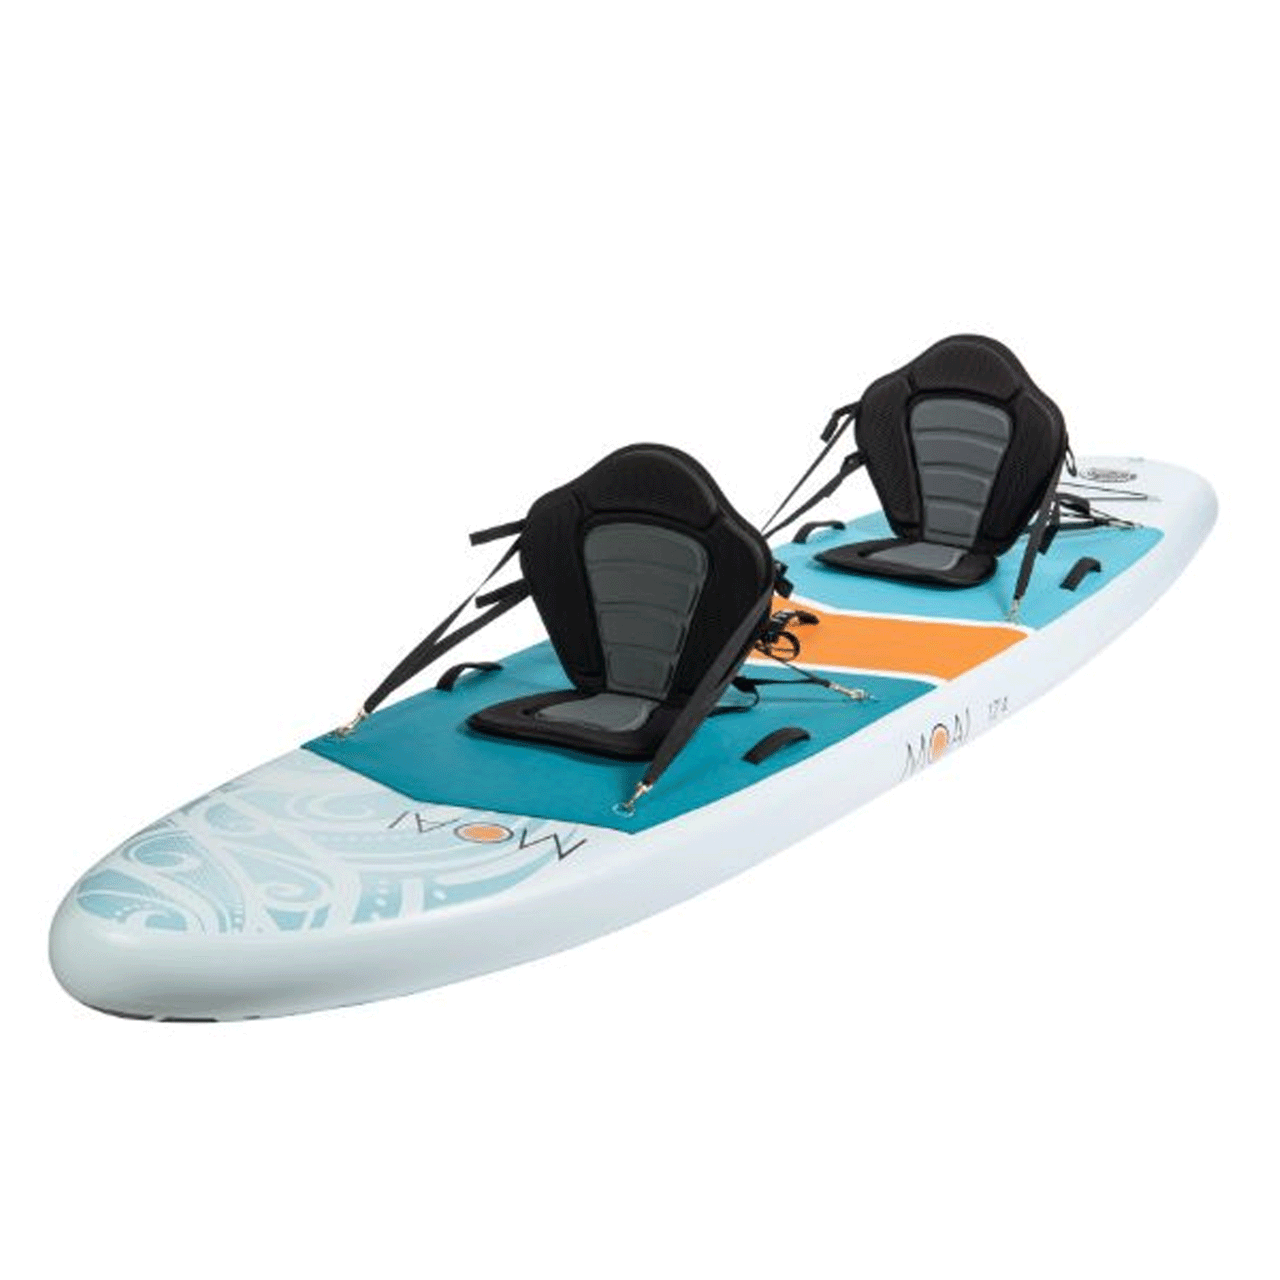 MOAI All-Round Inflatable SUP Package 12'4" (376cm) - Family Size